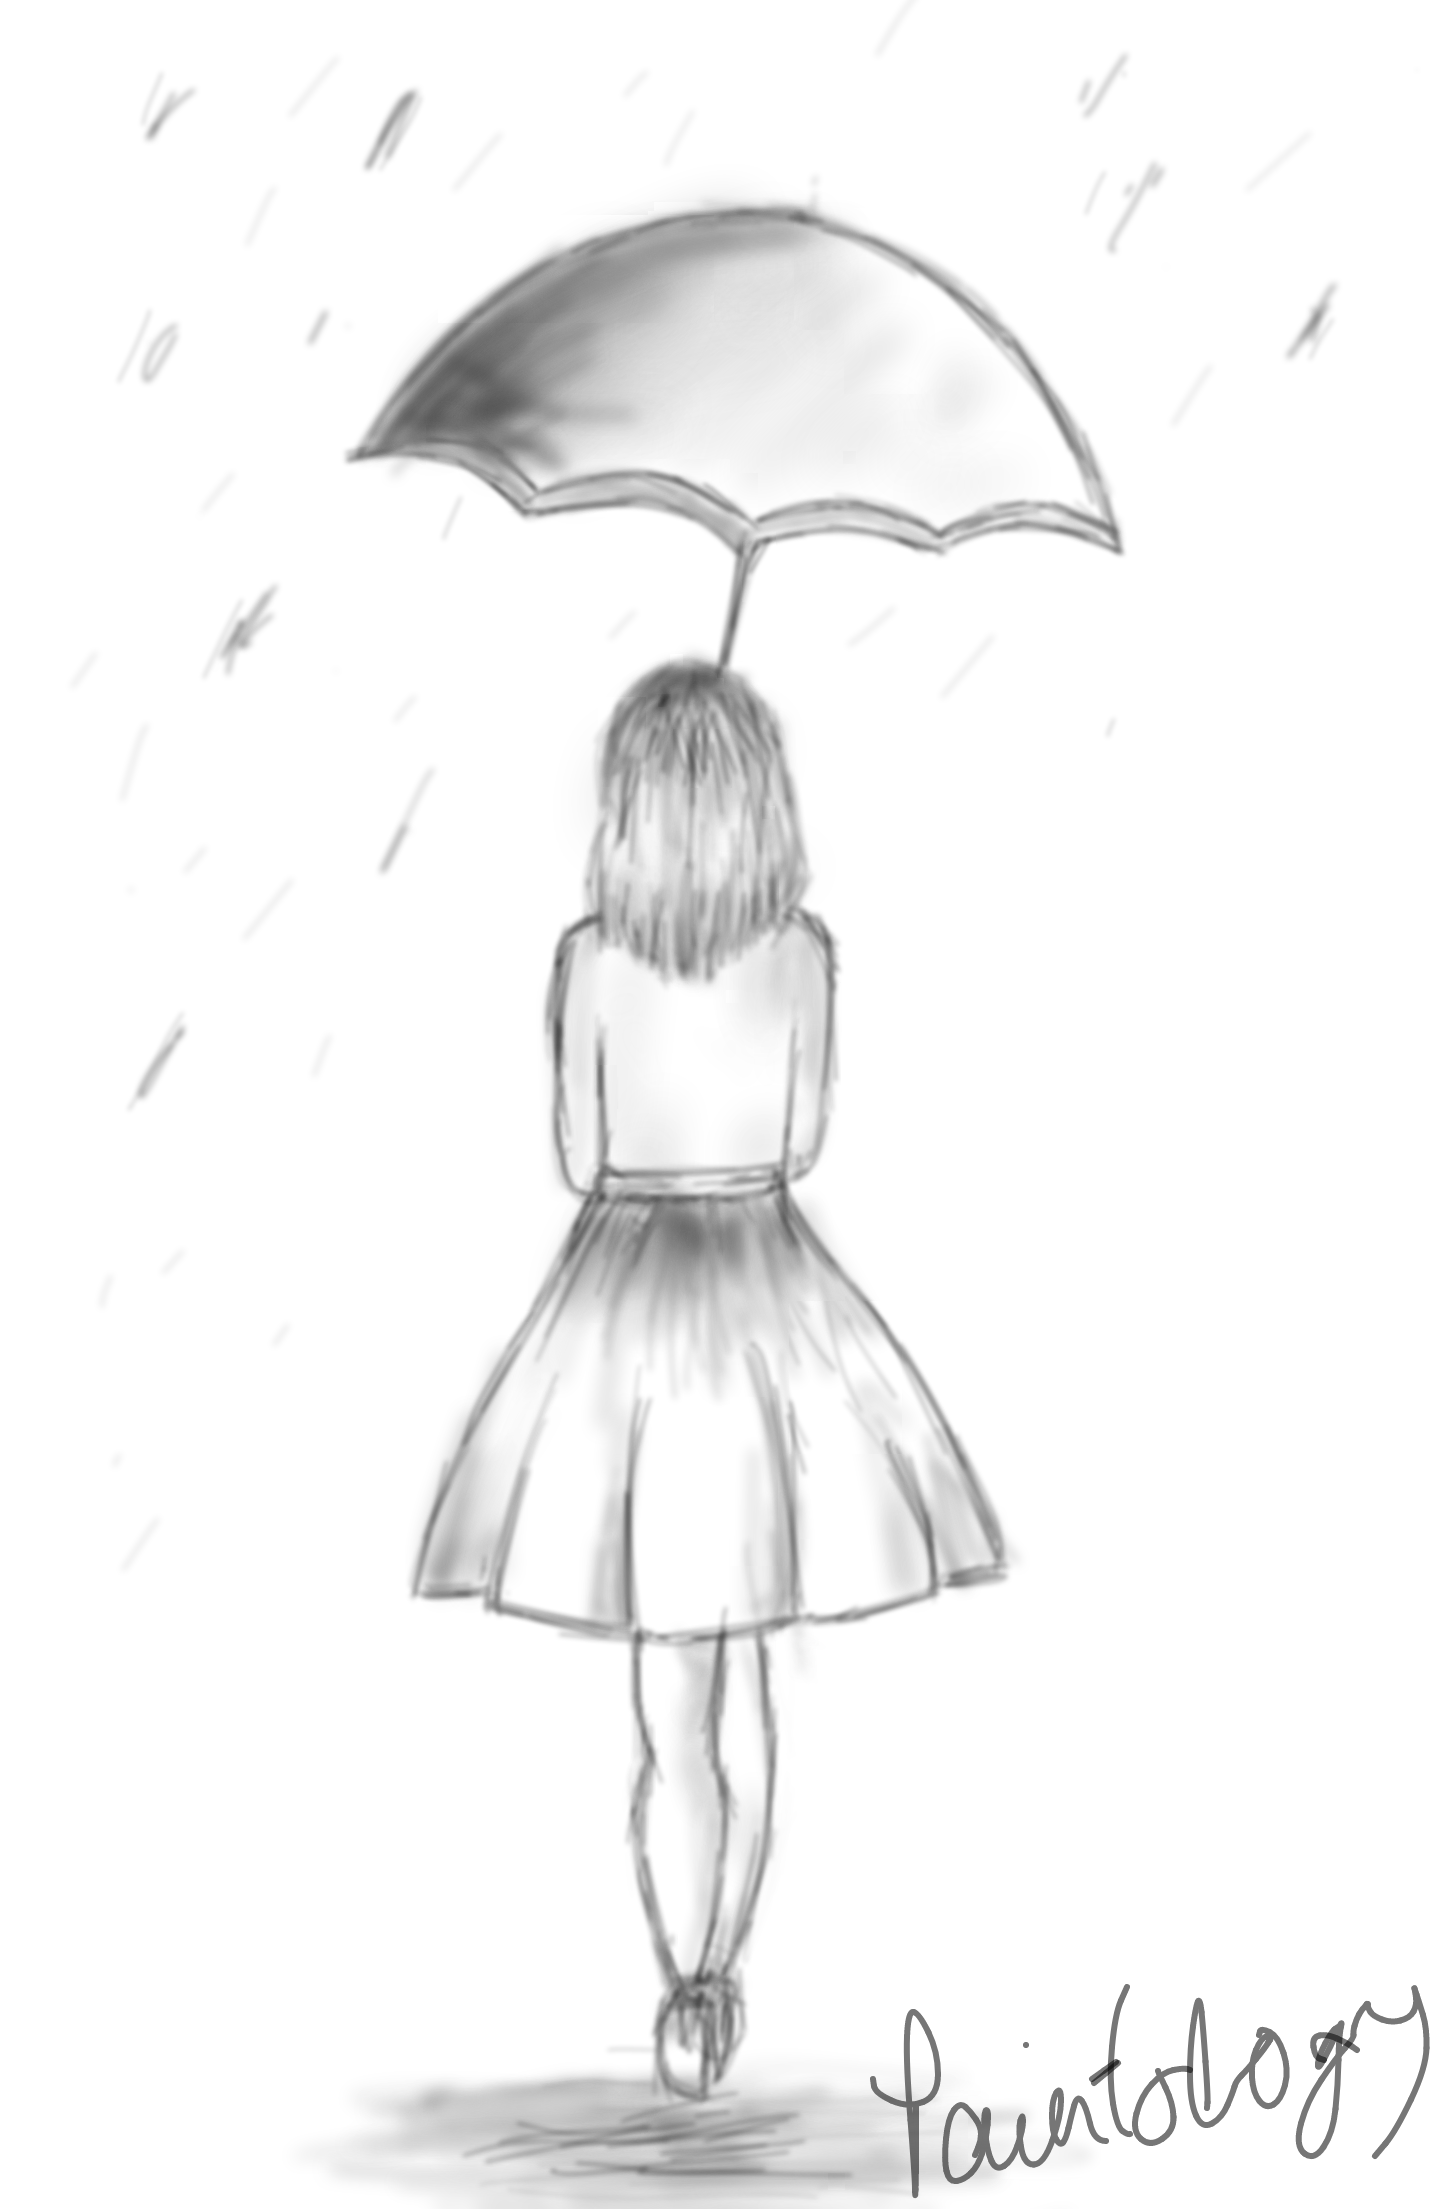 Cute umbrella Drawing and Coloring Pages for Kids, Babies, Toddlers | Umbrella  drawing, Umbrella coloring page, Easy drawings for kids